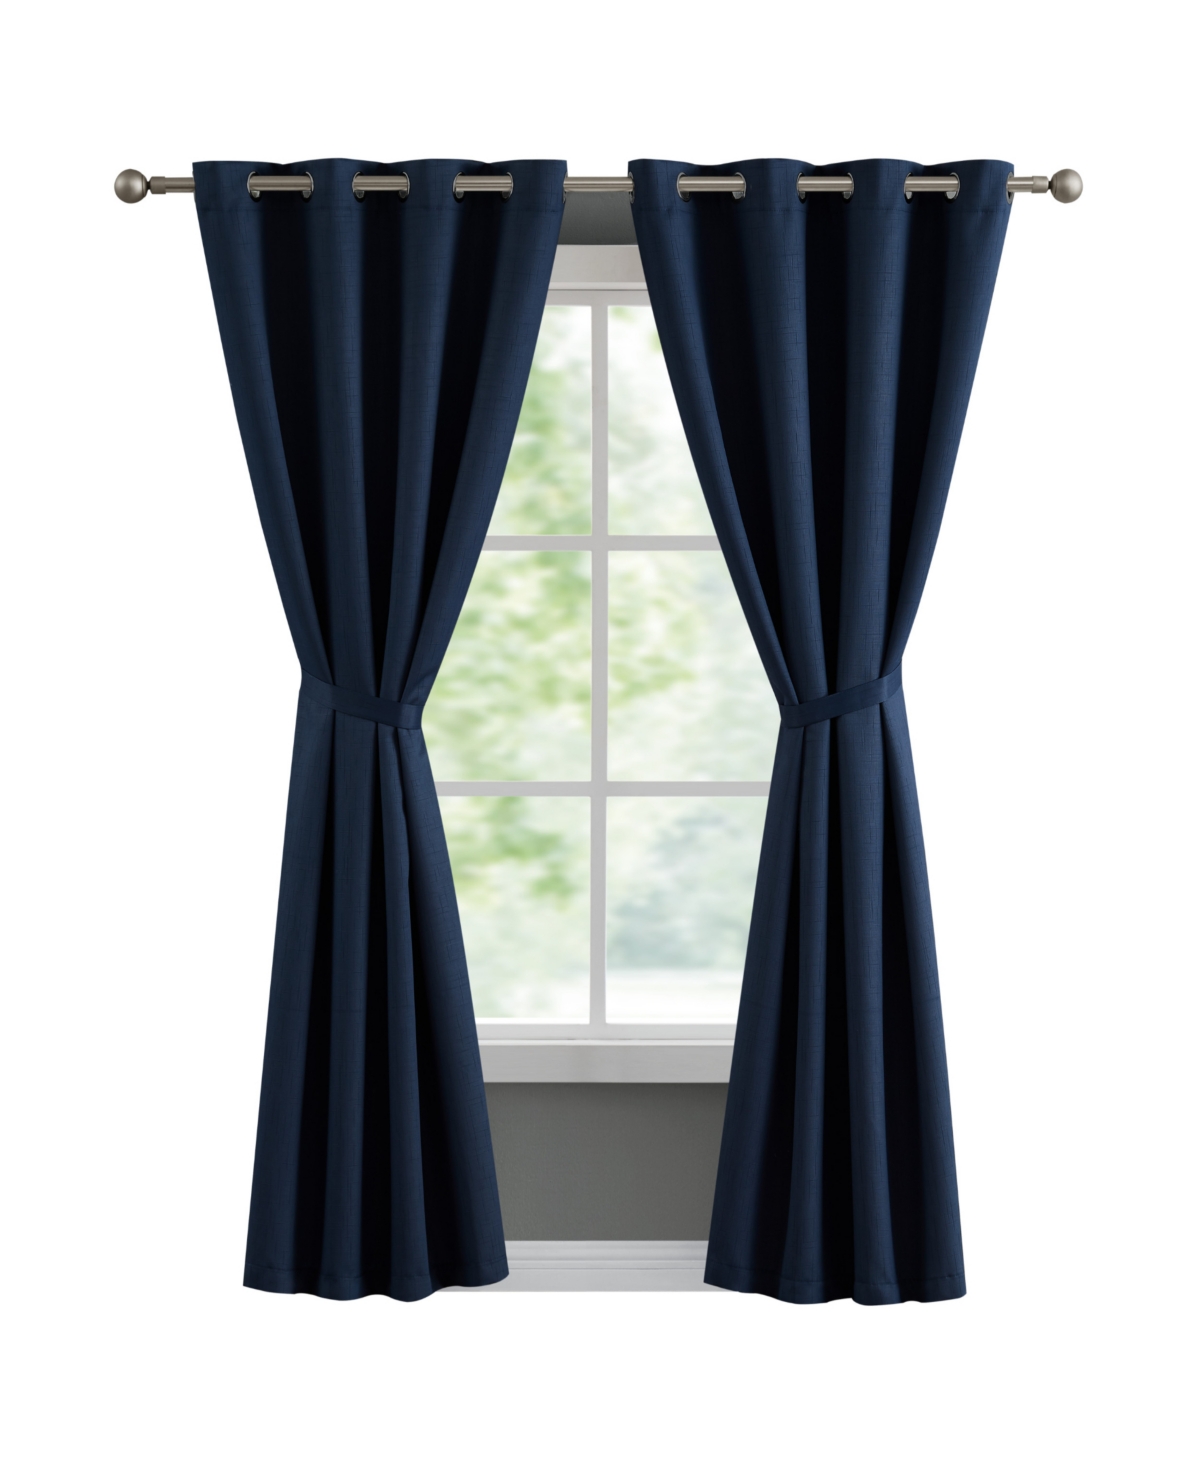 Shop French Connection Ebony Thermal Woven Room Darkening Grommet Window Curtain Panel Pair With Tiebacks, 50" X 96" In Indigo